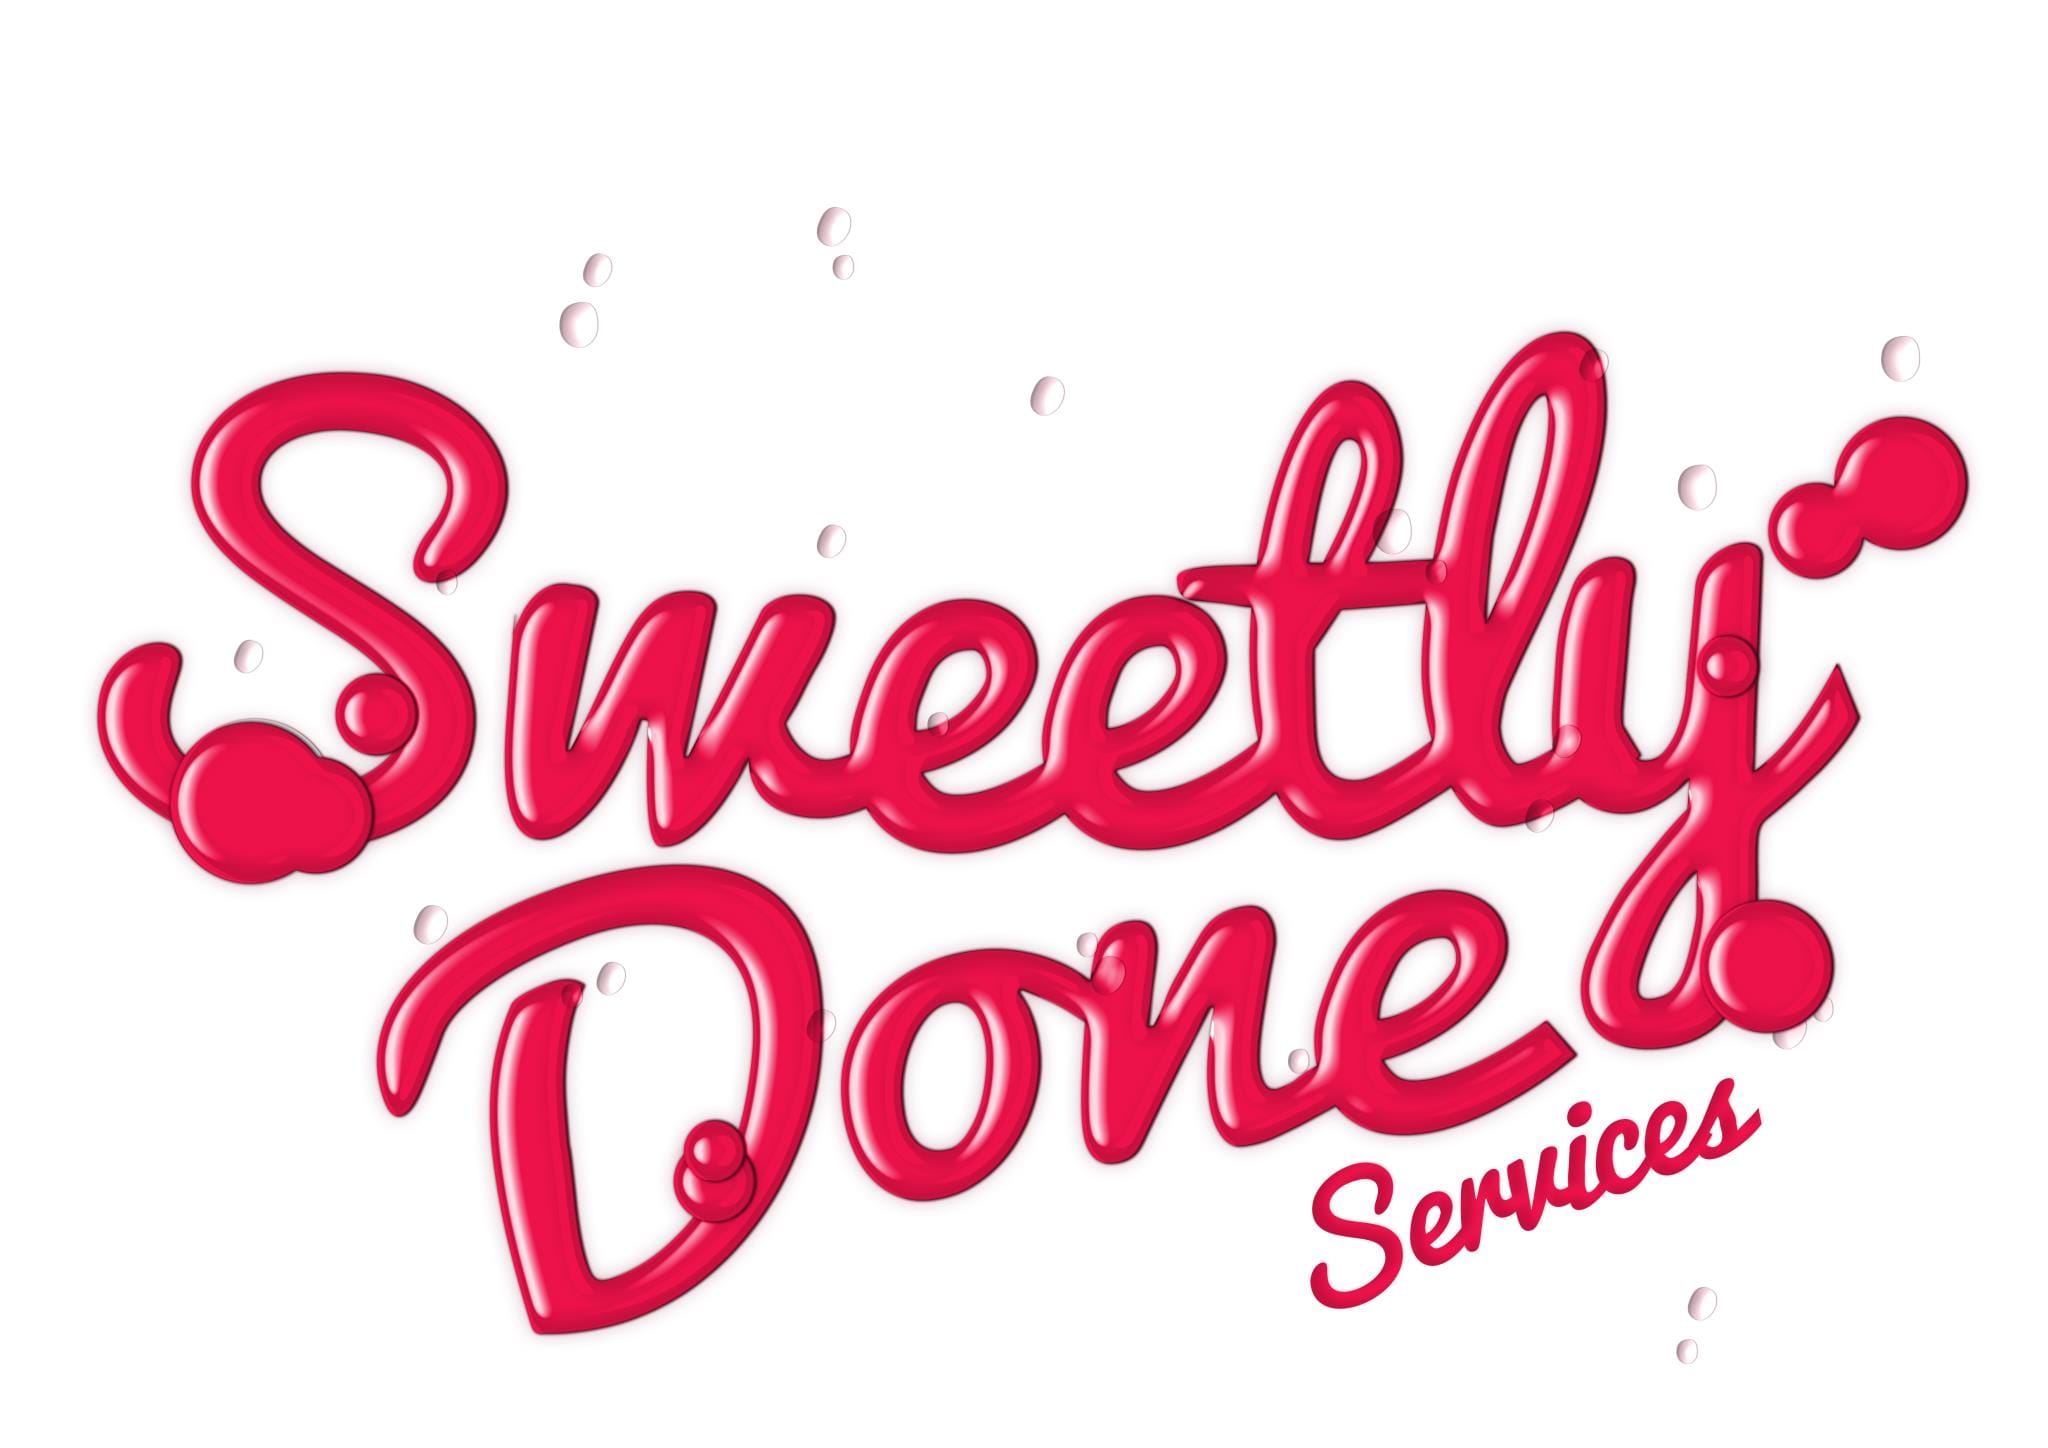 Sweetly Done Services